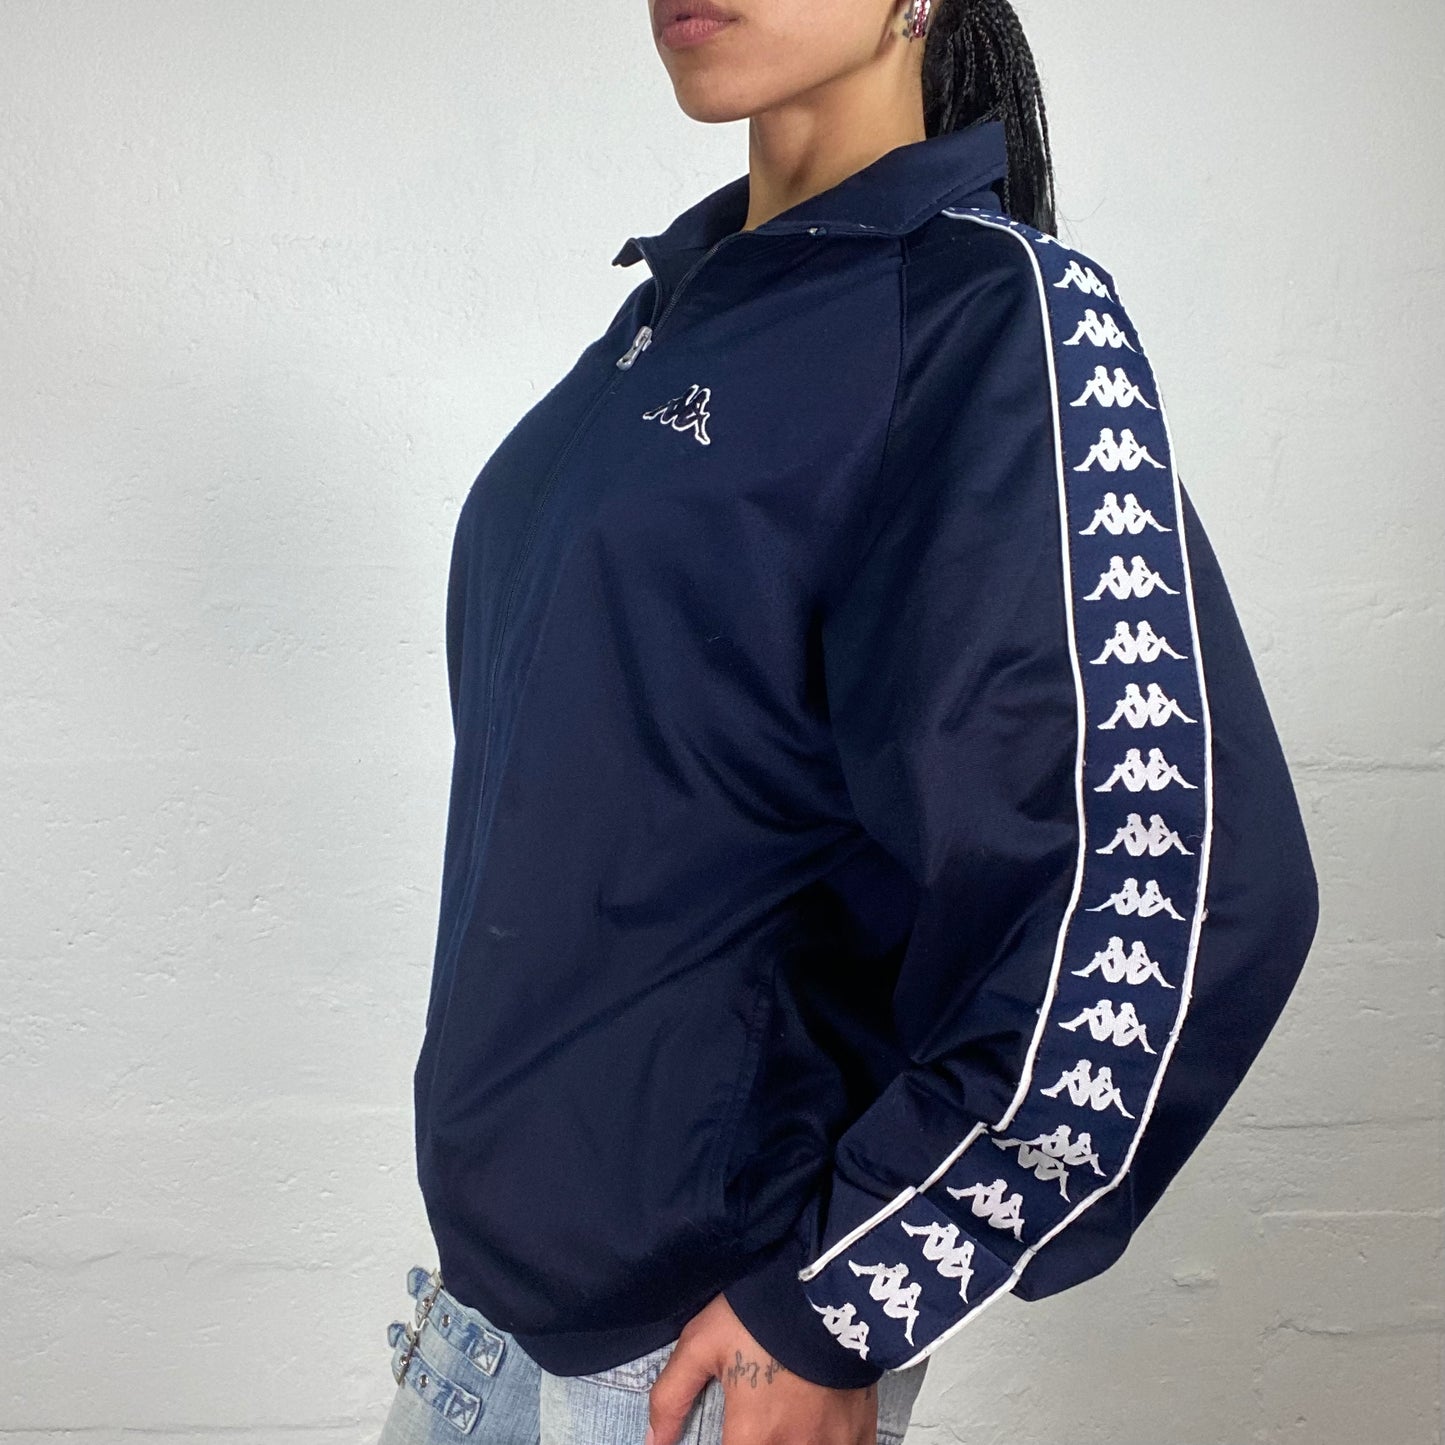 Vintage 90’s Kappa Sporty Navy Blue Zip Up Pullover with Sleeve Logo Print (L)